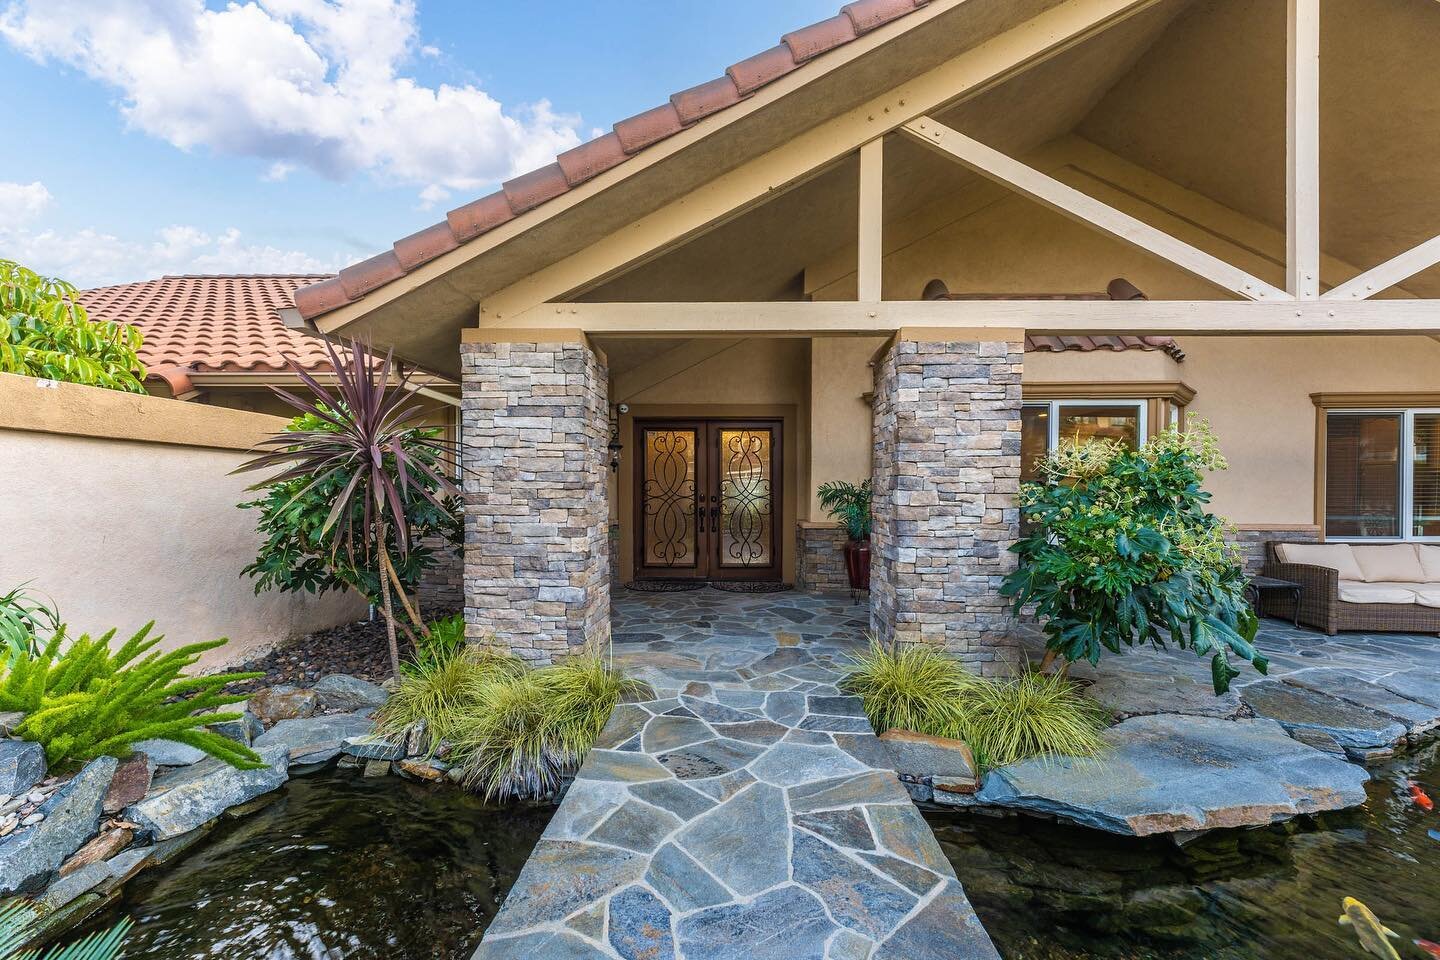 Koi pond at your front entrance? Yes! 🔥🔥

Looking for high quality photos/video for your next listing? DM @inlandrealestatephotography for details or go to www.inlandrealestatephotography.com
.
#riversiderealestatephotography #luxuryphotography #in